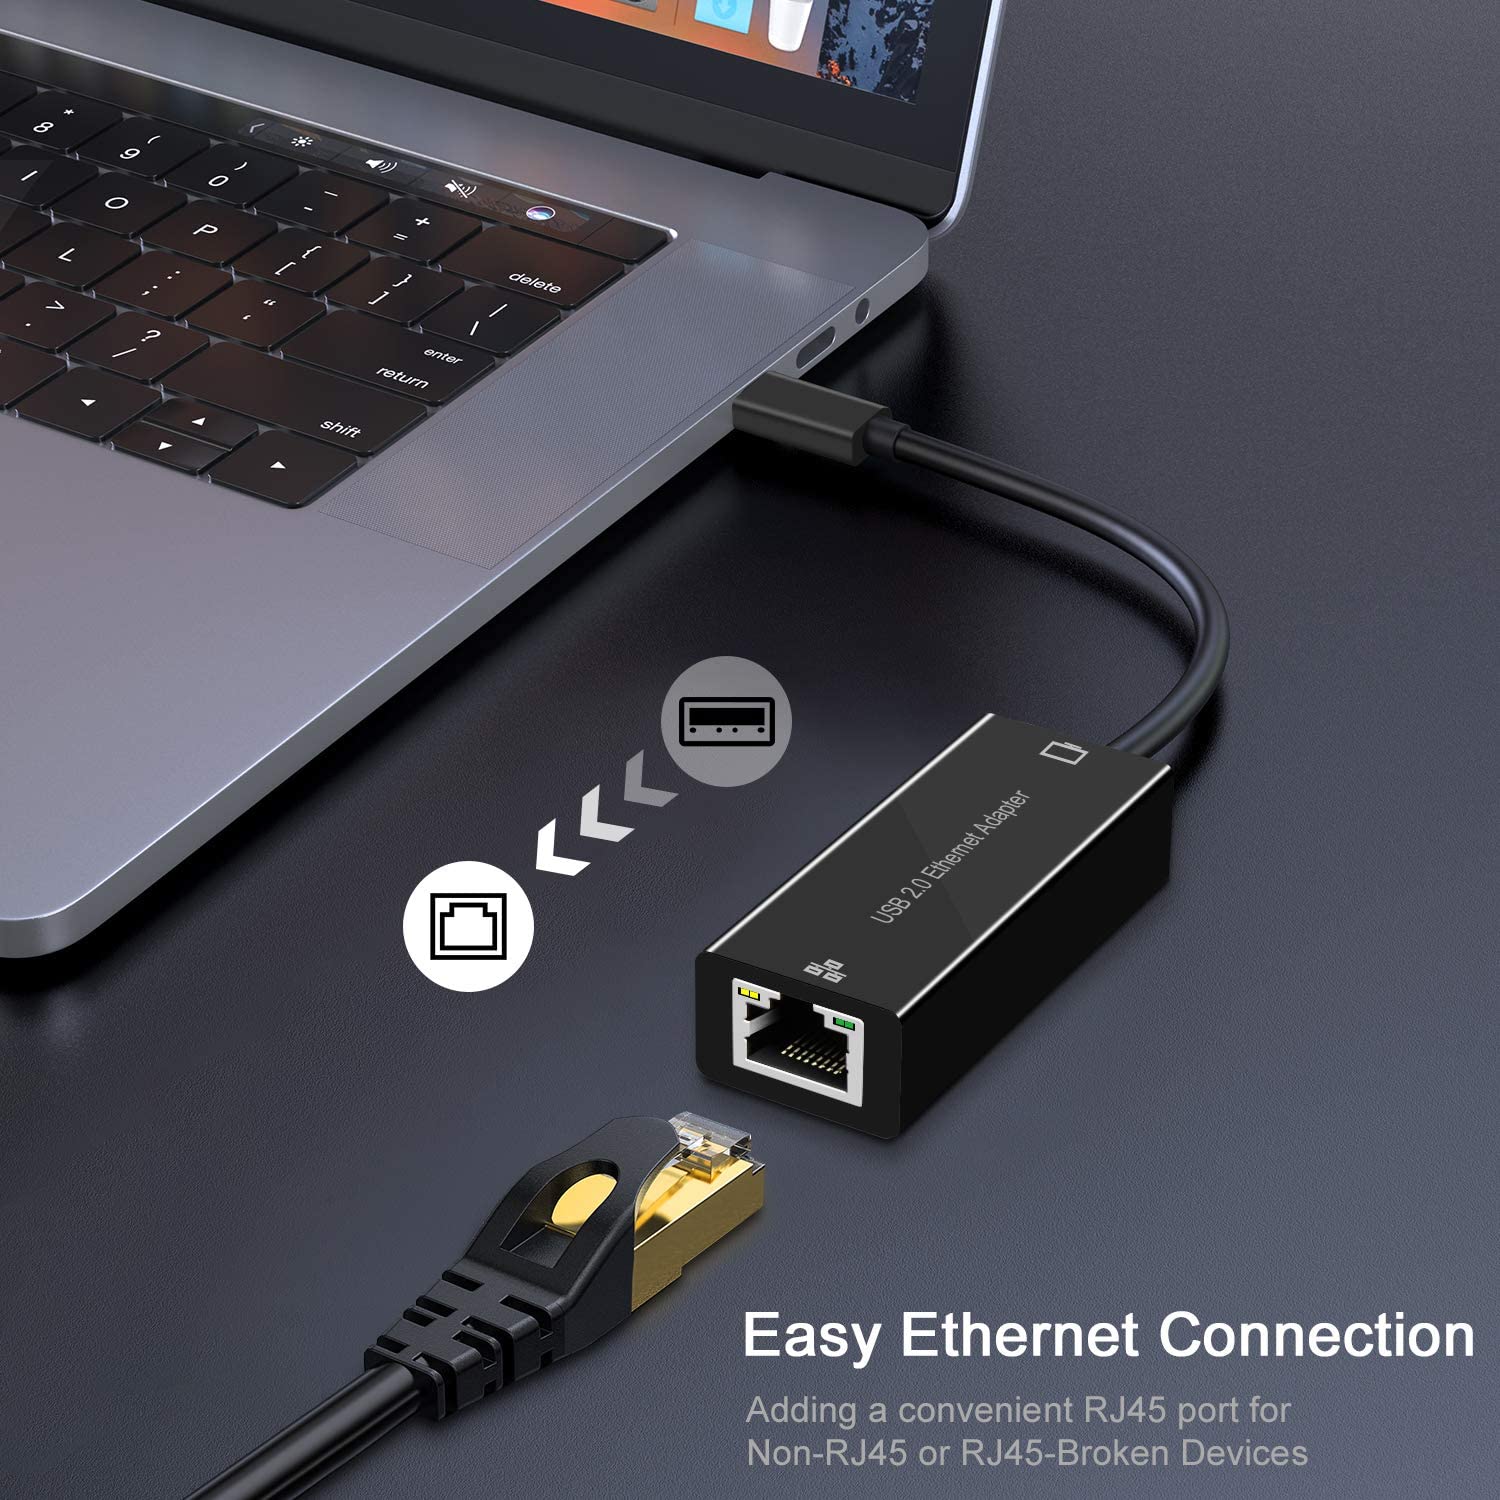 USB 2.0 to ethernet Adapter USB to RJ45 Supporting 10/100 Mbps Ethernet  Network for Window/Mac OS, Surface Pro/Linux